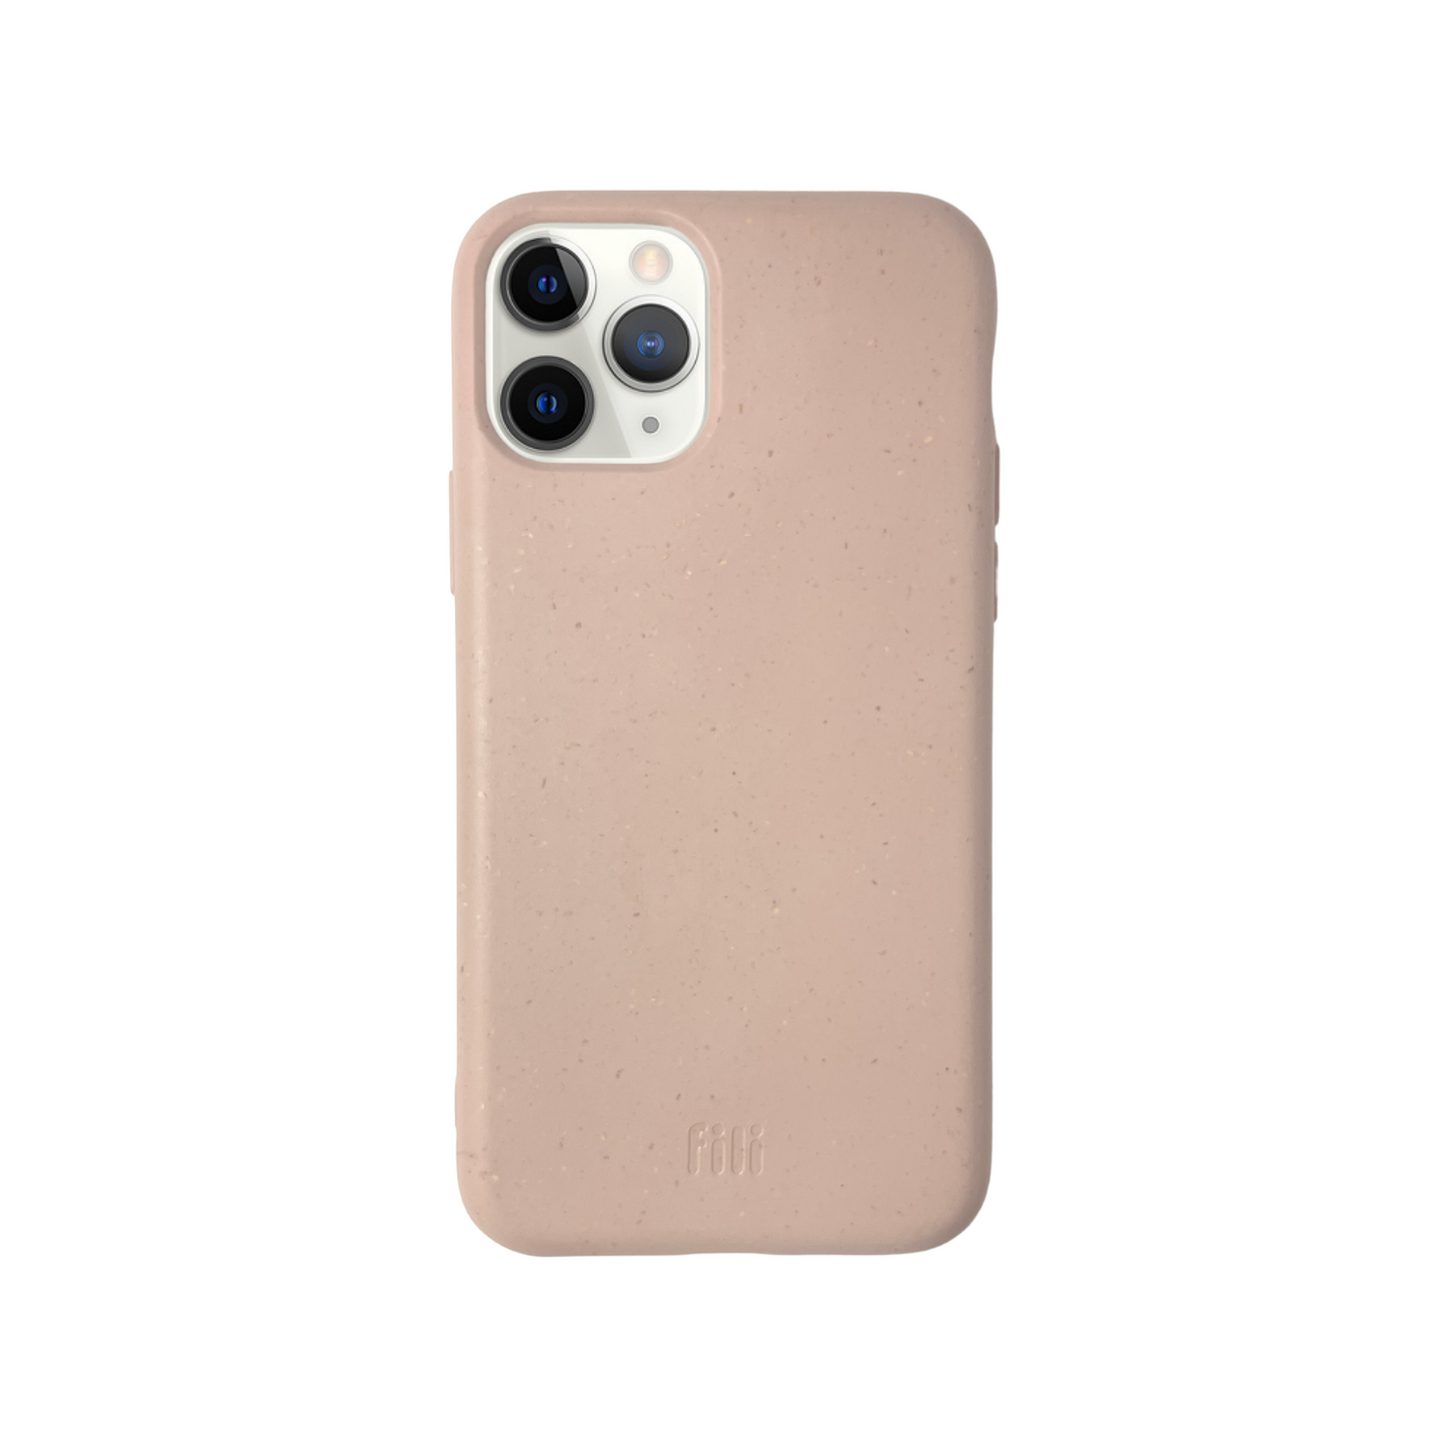 FILI Biodegradable Smooth iPhone 11 Pro Case